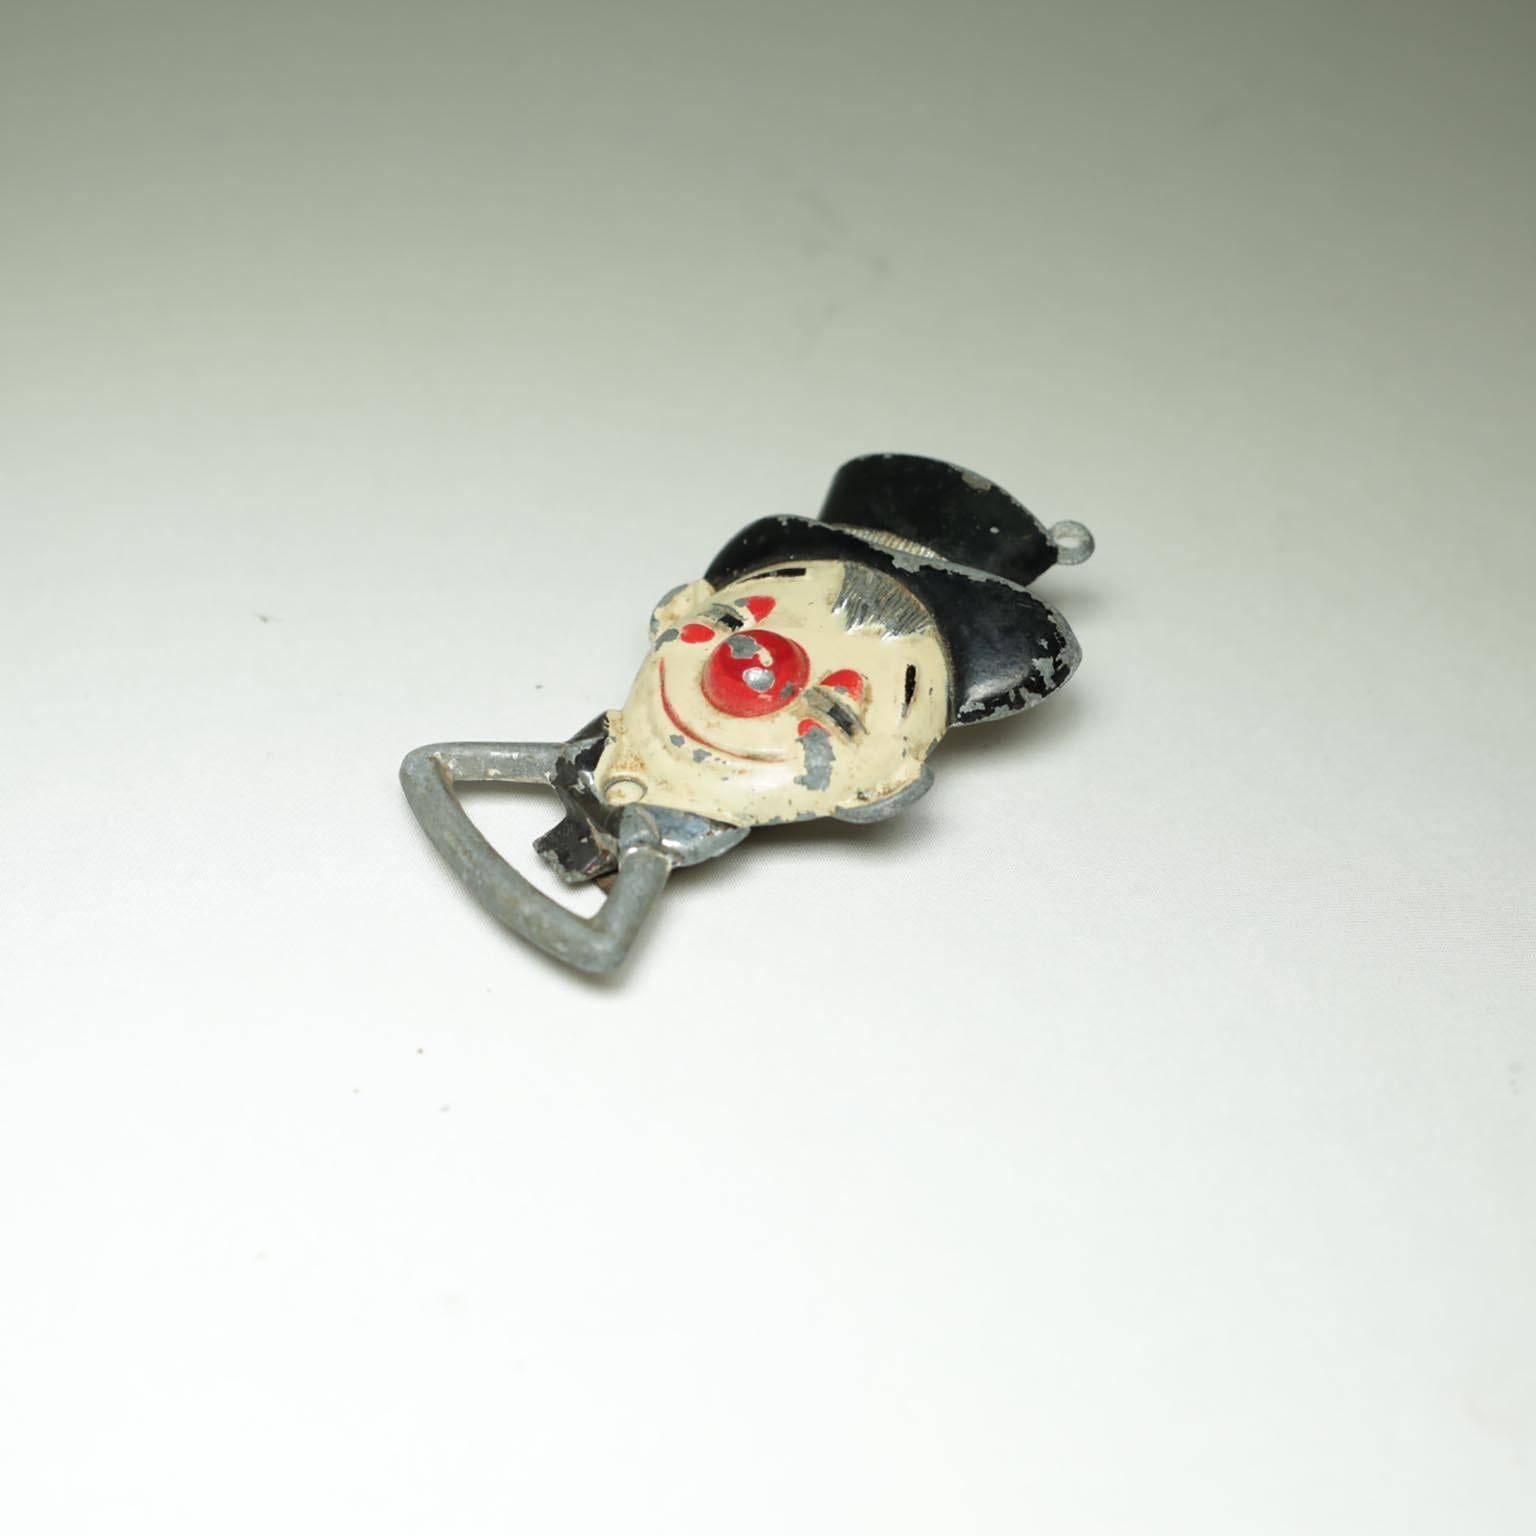 Clown bottle opener with swing around can opener, circa 1940s.